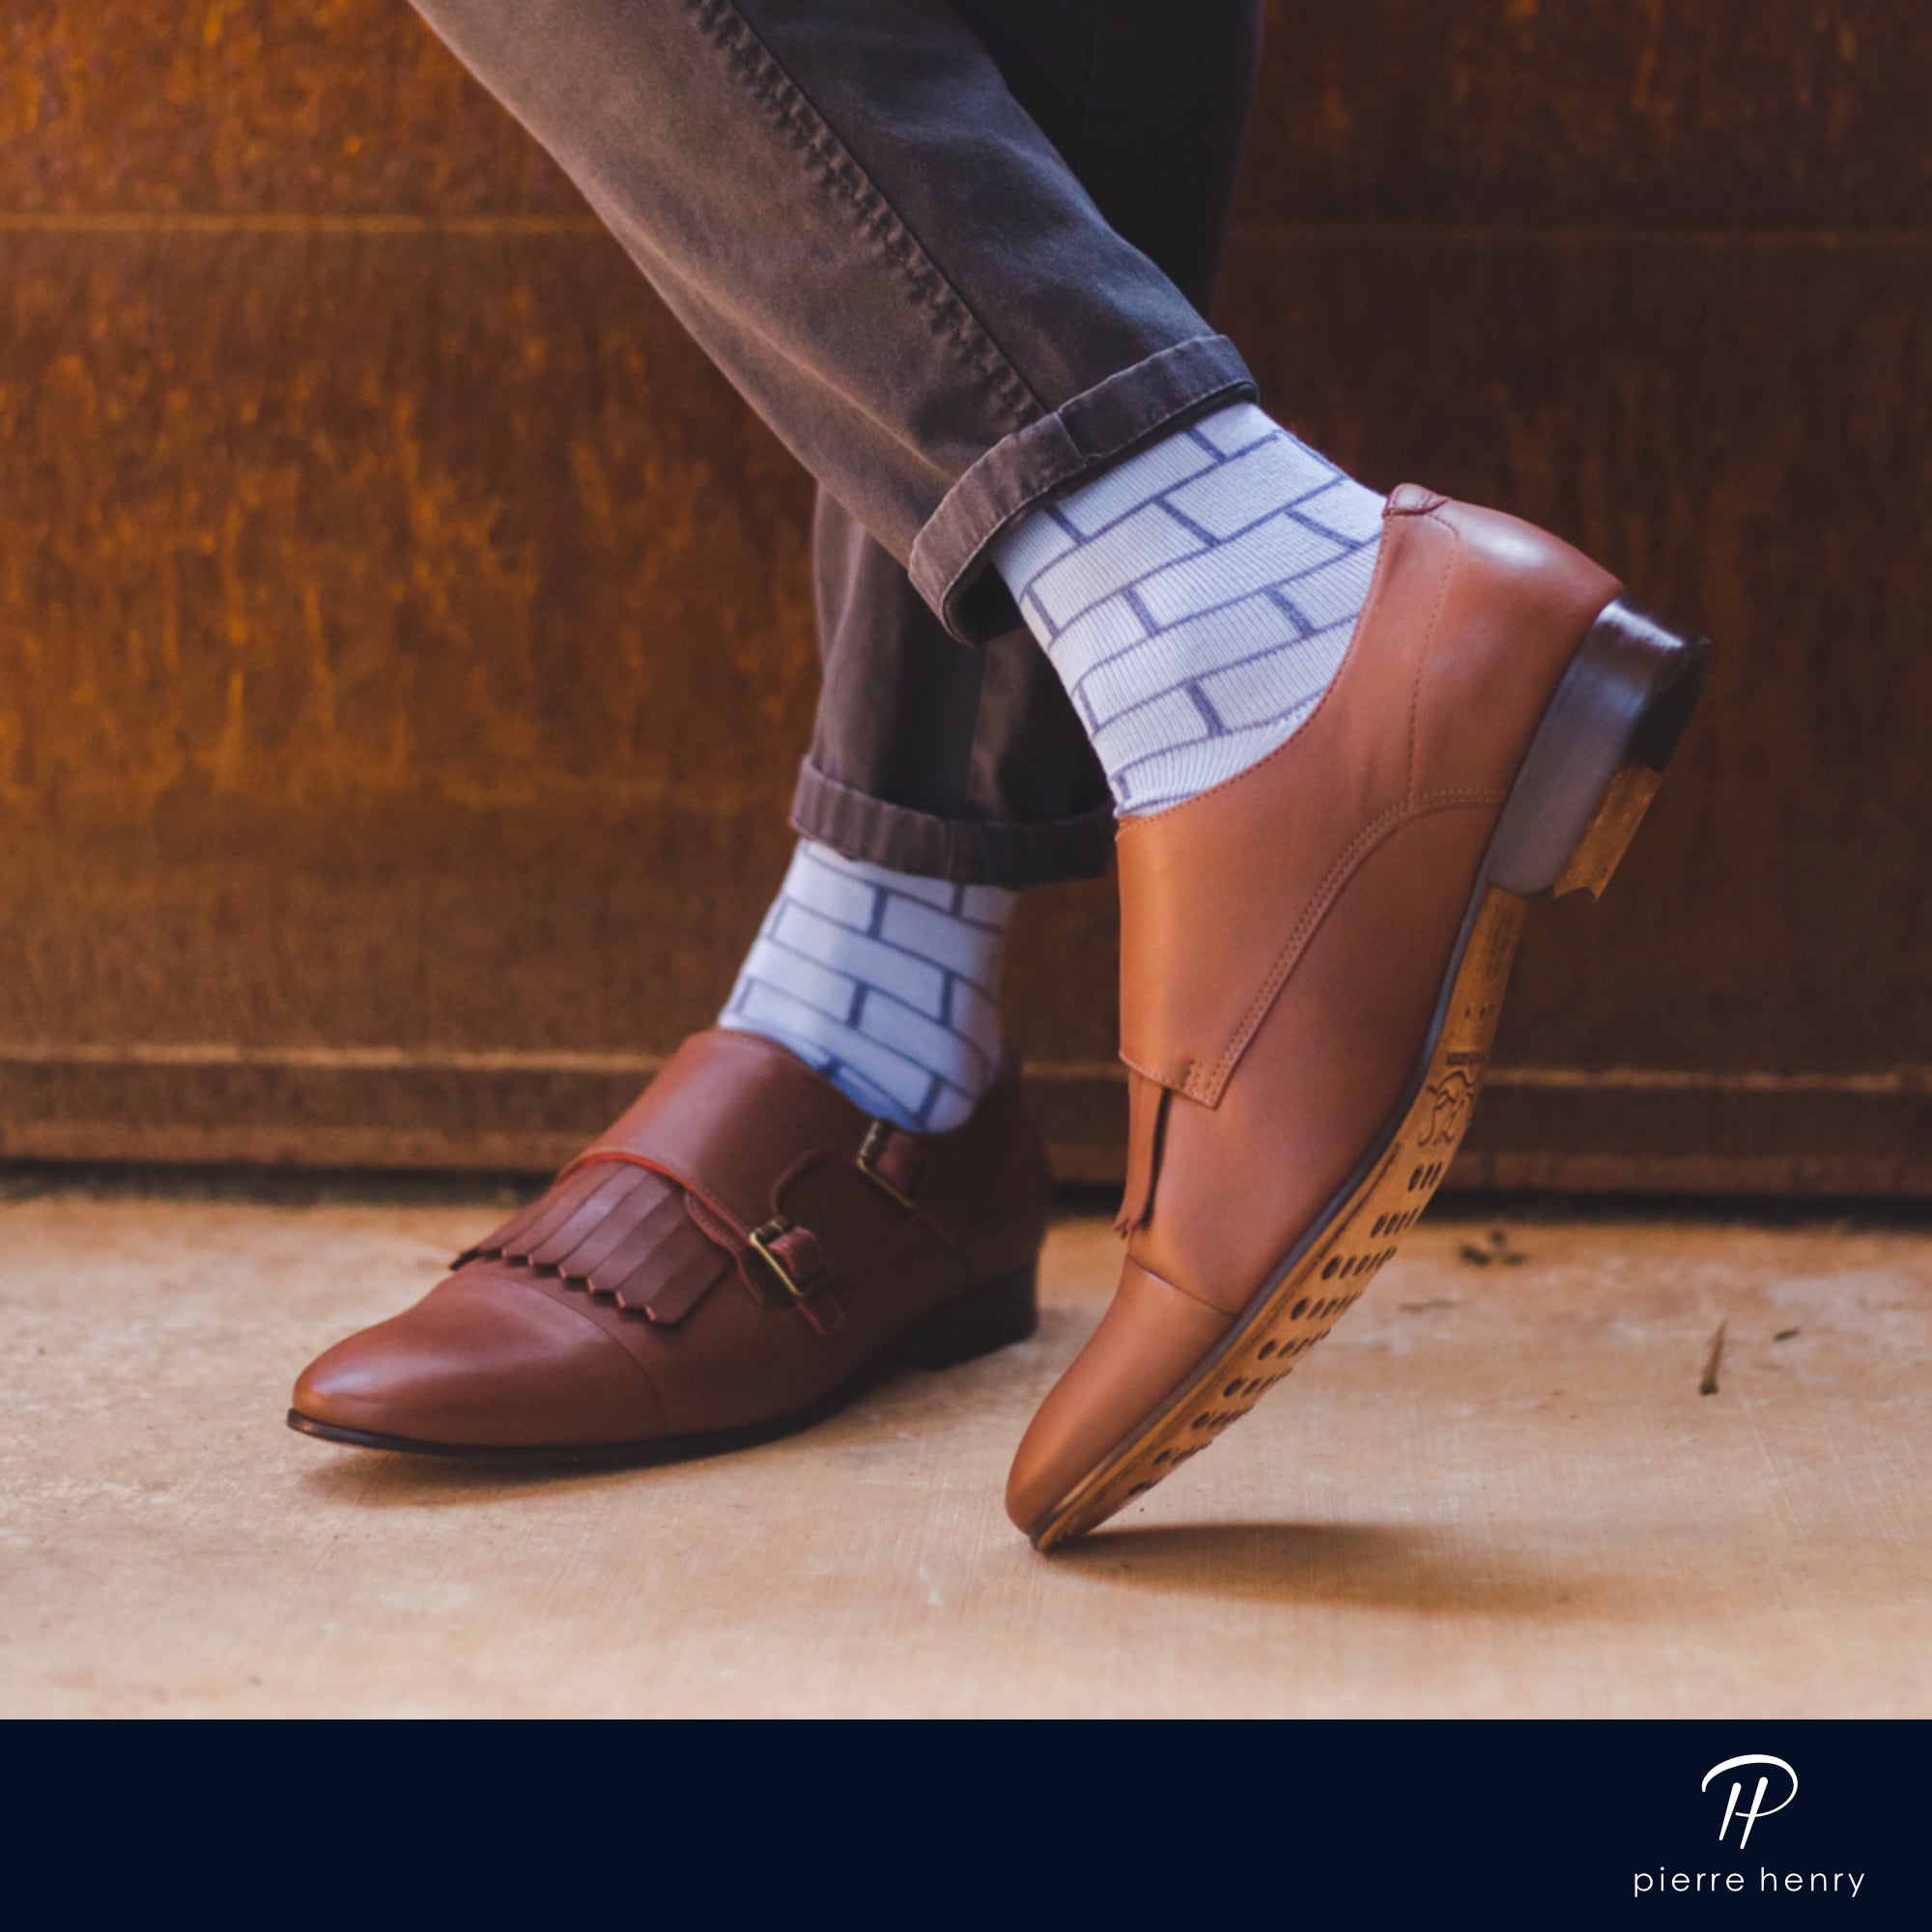 light blue over the calf dress socks with blue line brick pattern, light brown shoes, black washed pants